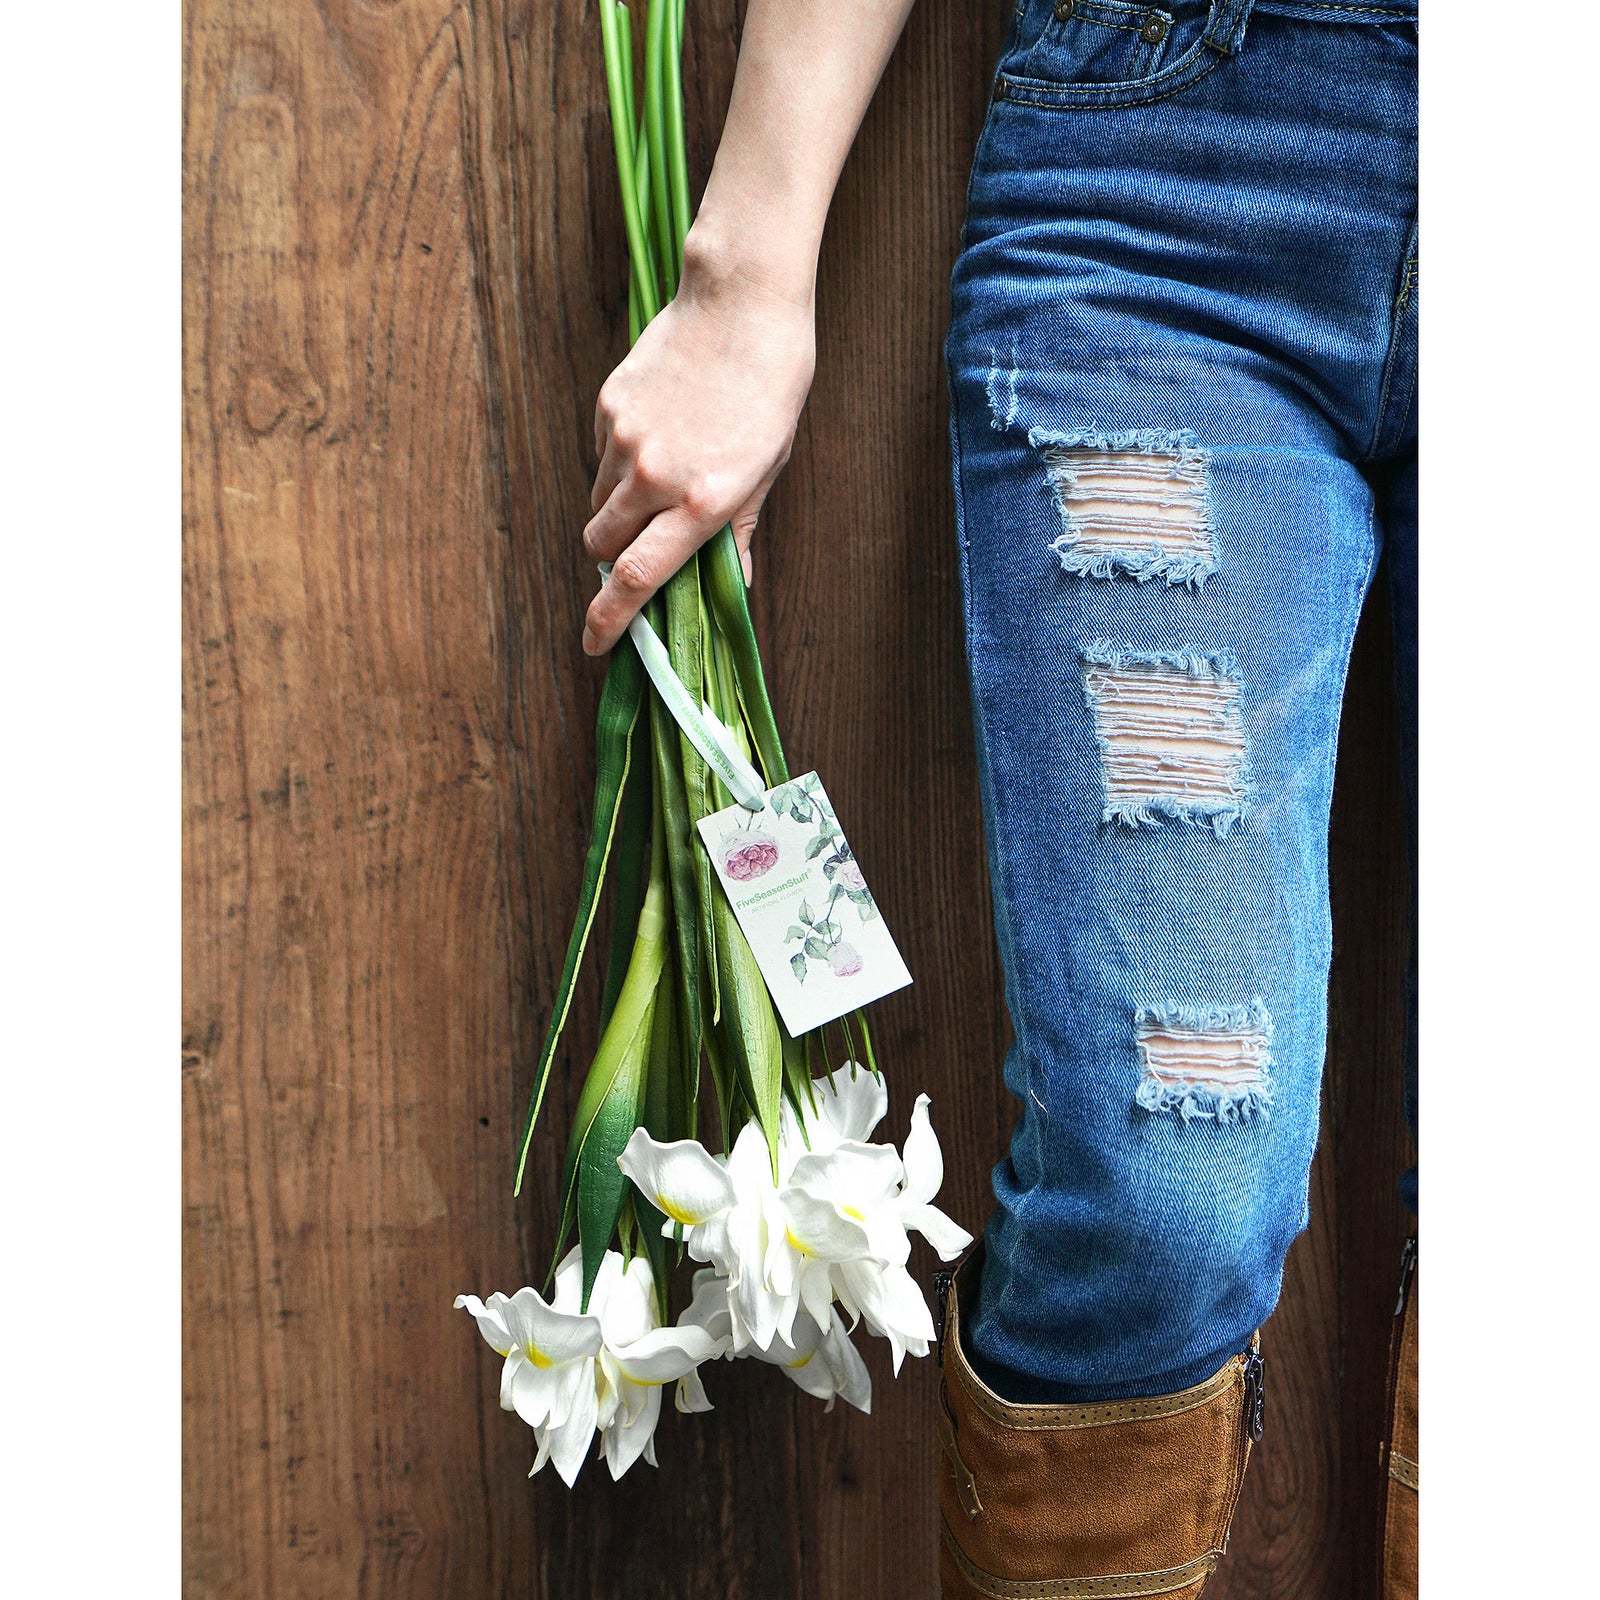 6 Long Stems Iris (White) Real Touch Artificial Flower Bouquet